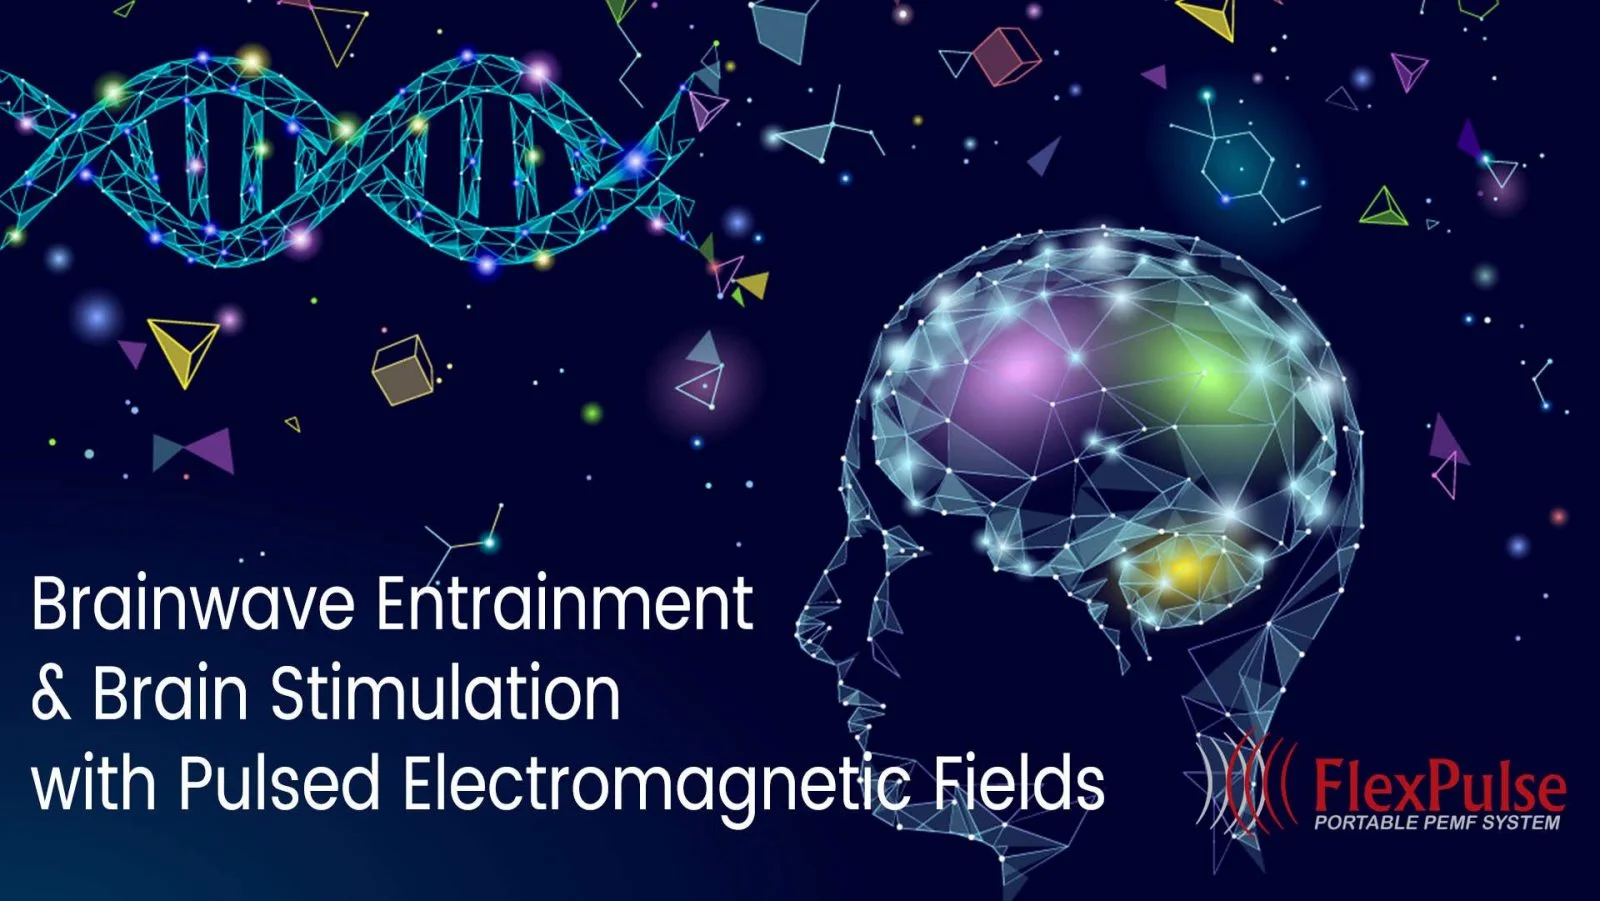 Brainwave Entertainment and Brain Stimulation with Pulsed Electromagnetic Fields, along with an image of a brain being enlightened.